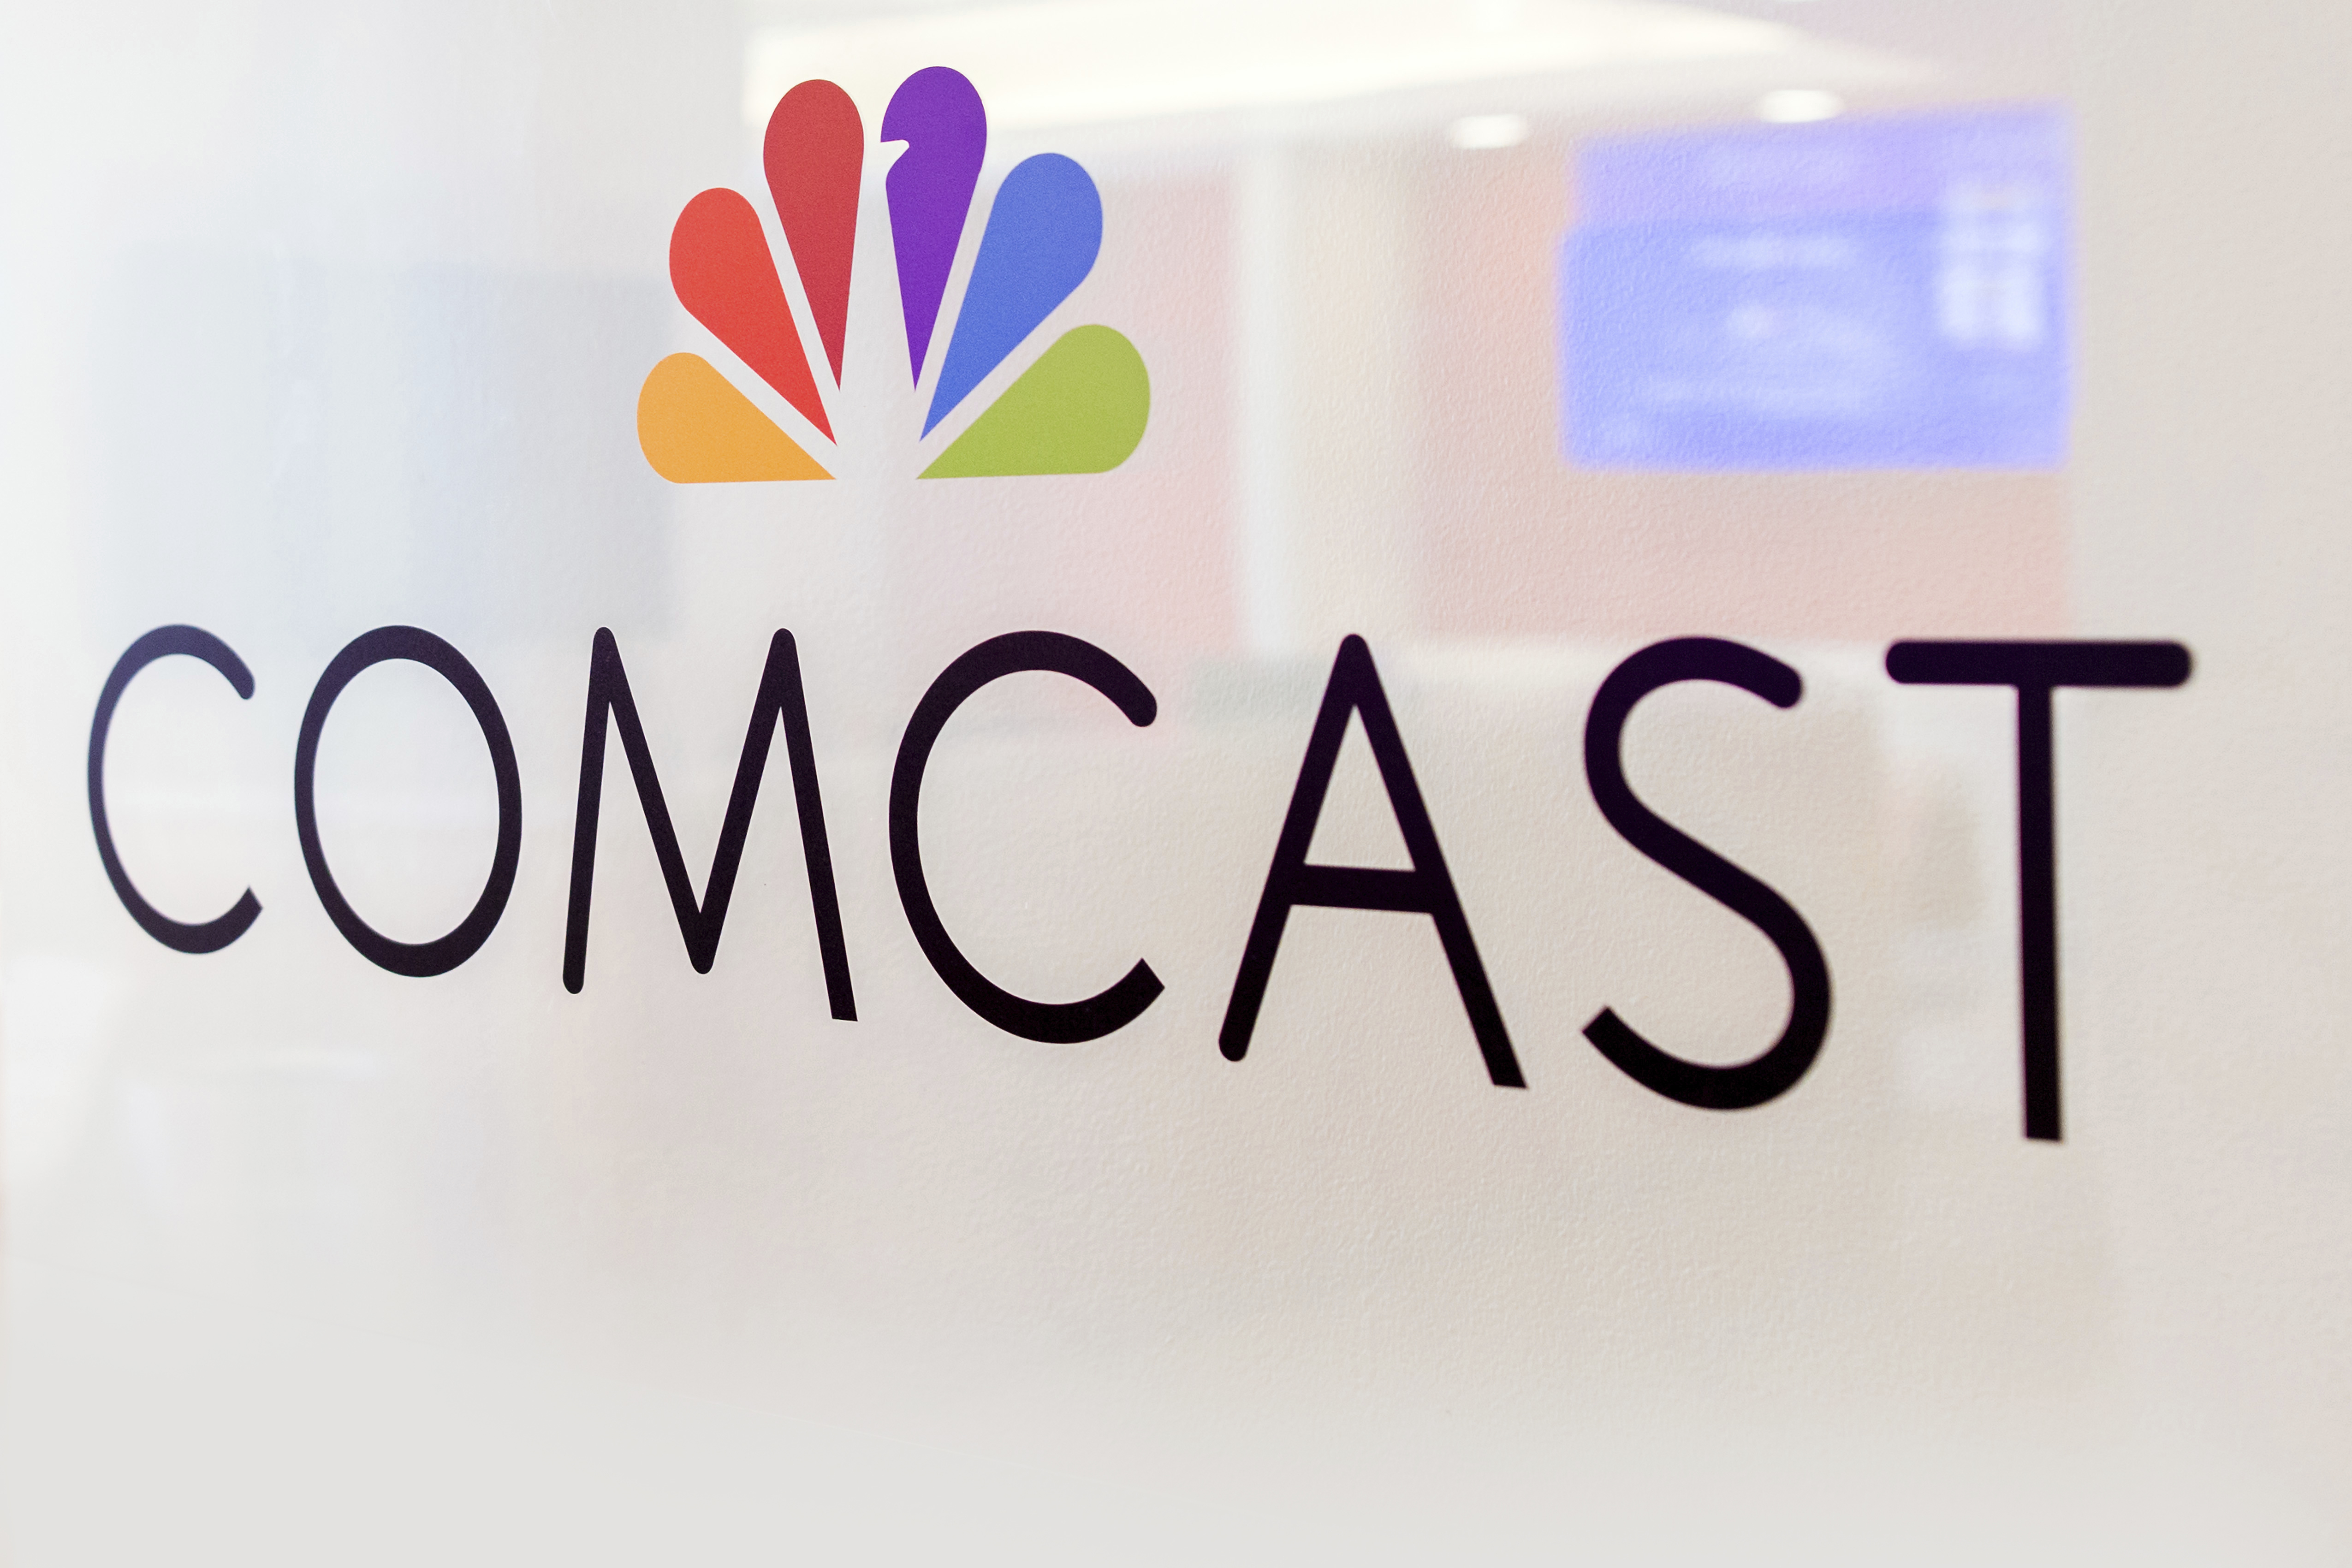 Comcast stock drops after company reports surprise loss in broadband subscribers